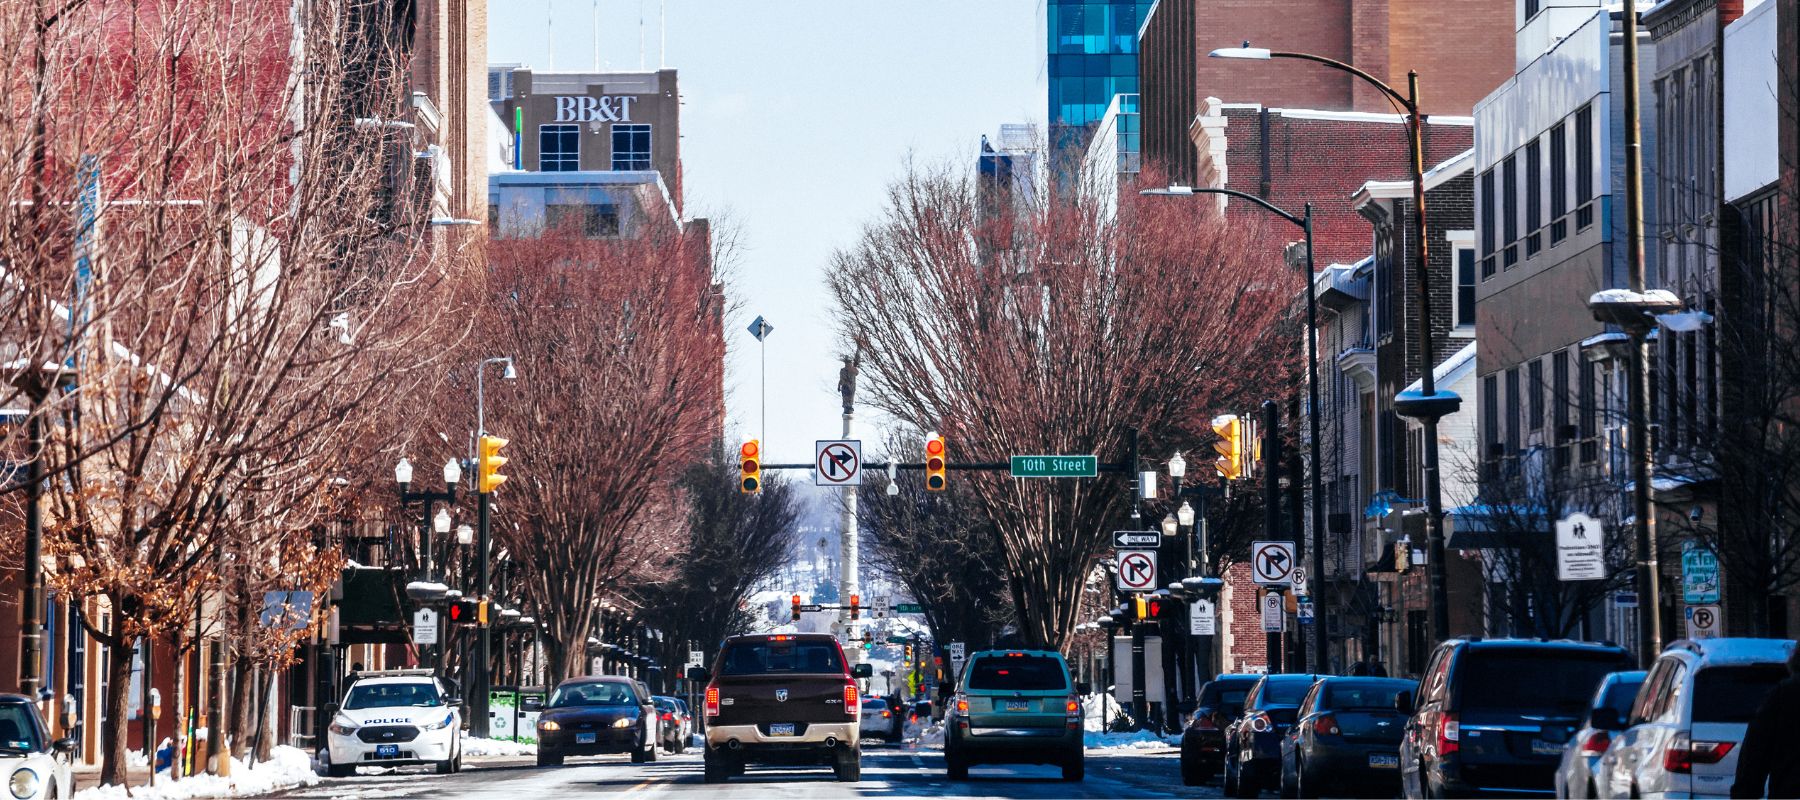 A bustling city street lined with leafless trees and buildings, including a bank, under a clear sky. The image captures the urban rhythm with cars, street lights, and pedestrians, framing a typical day in a downtown area during winter